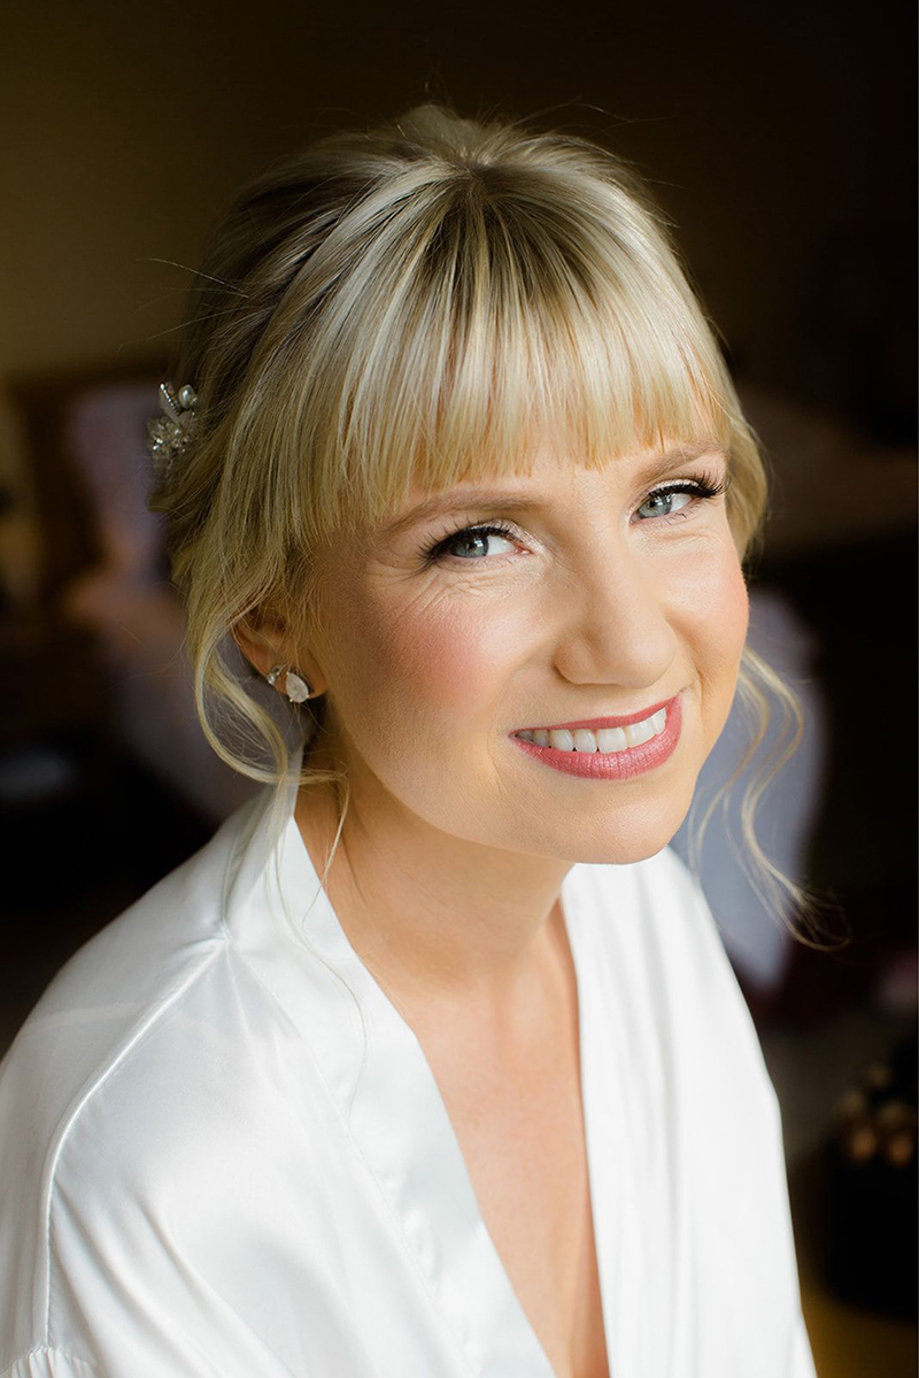 Blonde bride with fringe smiles at the camera with coral lipstick and blush